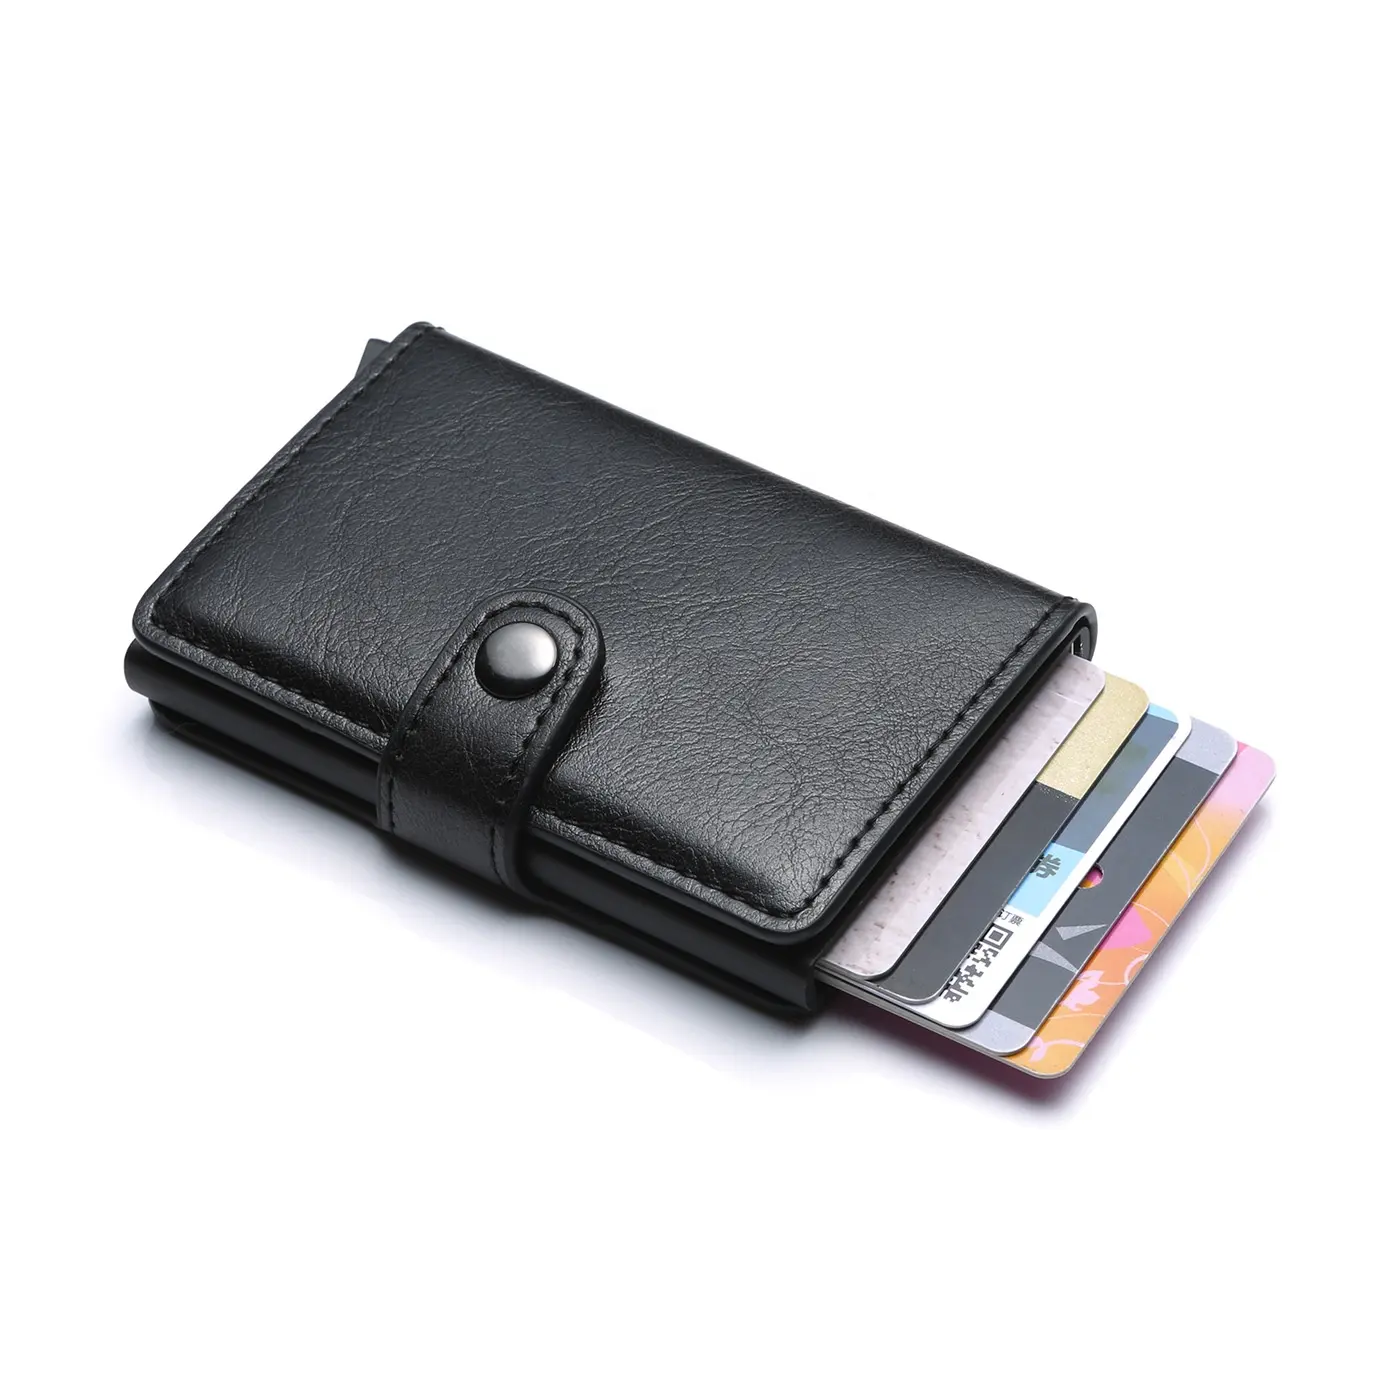 Card Holder Wallet For Women RFID Credit Card Holder Pu Leather Wallet Aluminum Airtag Wallet Pop Up RFID Credit Card Holder Wallet For Men Women